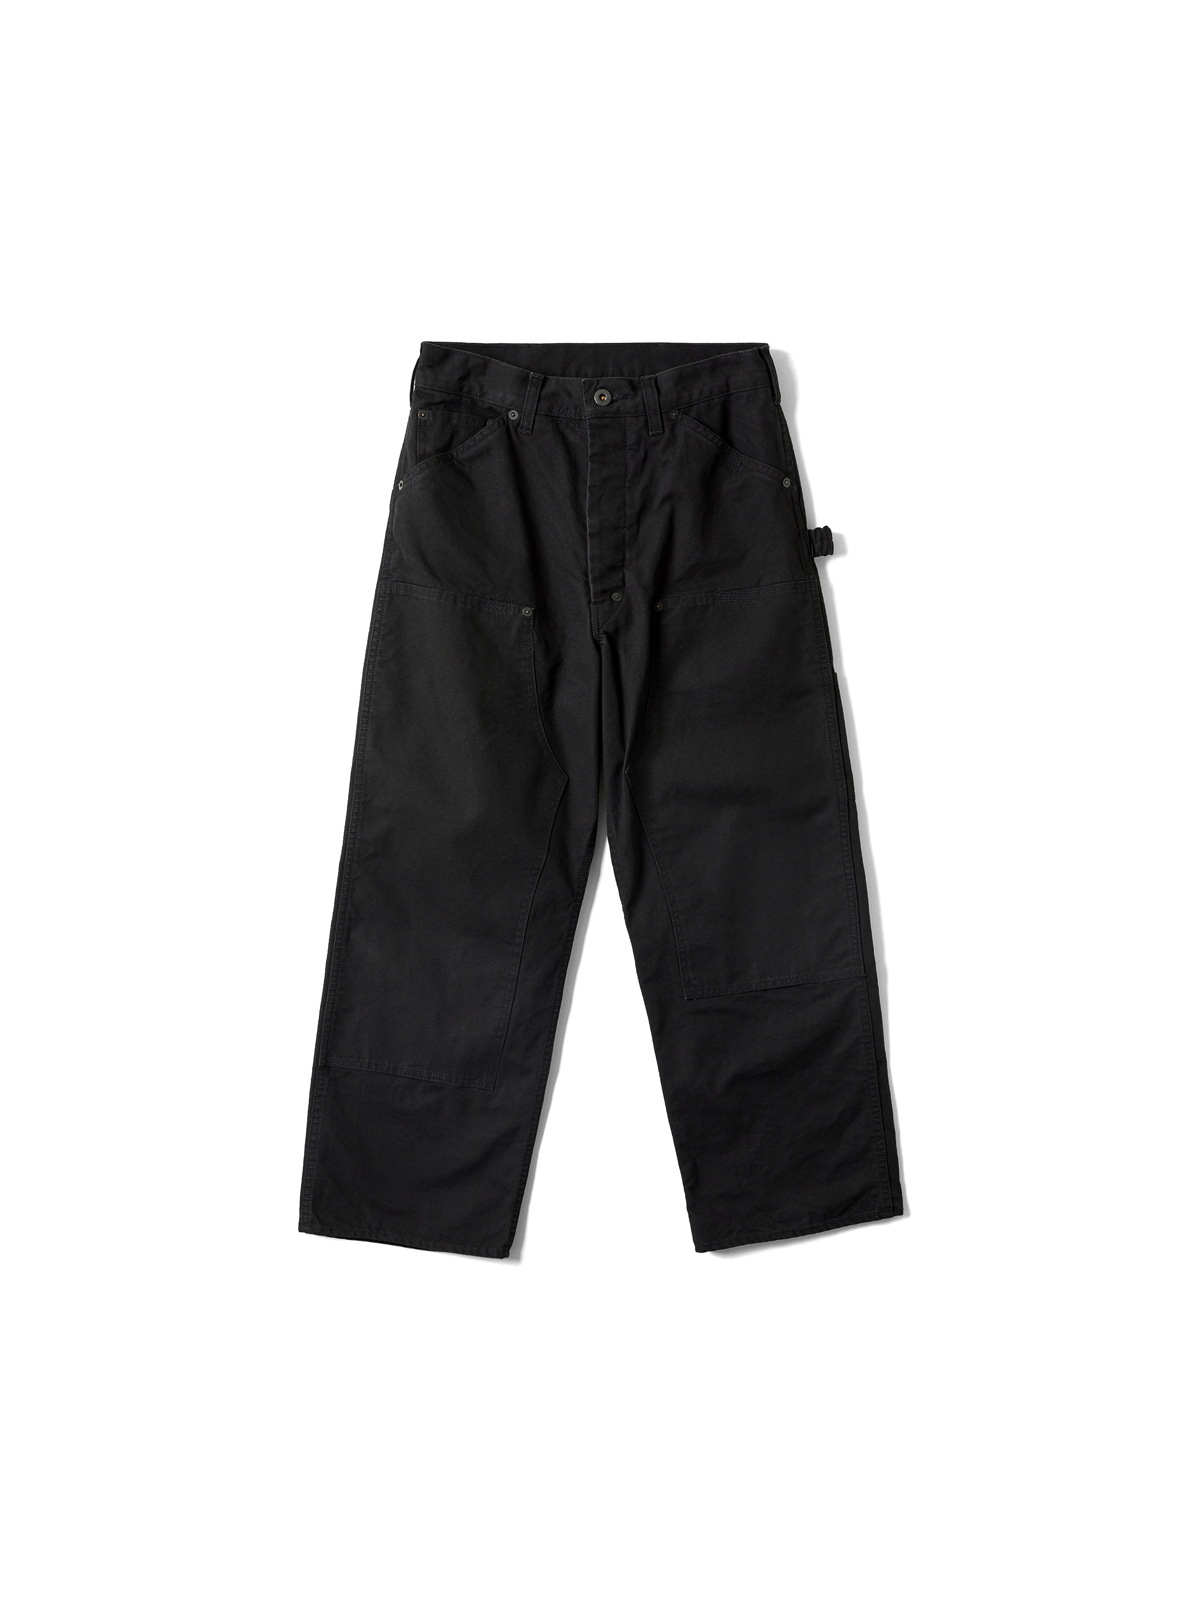 RIGHT HANDED DOUBLE KNEE PANTS (BLACK)